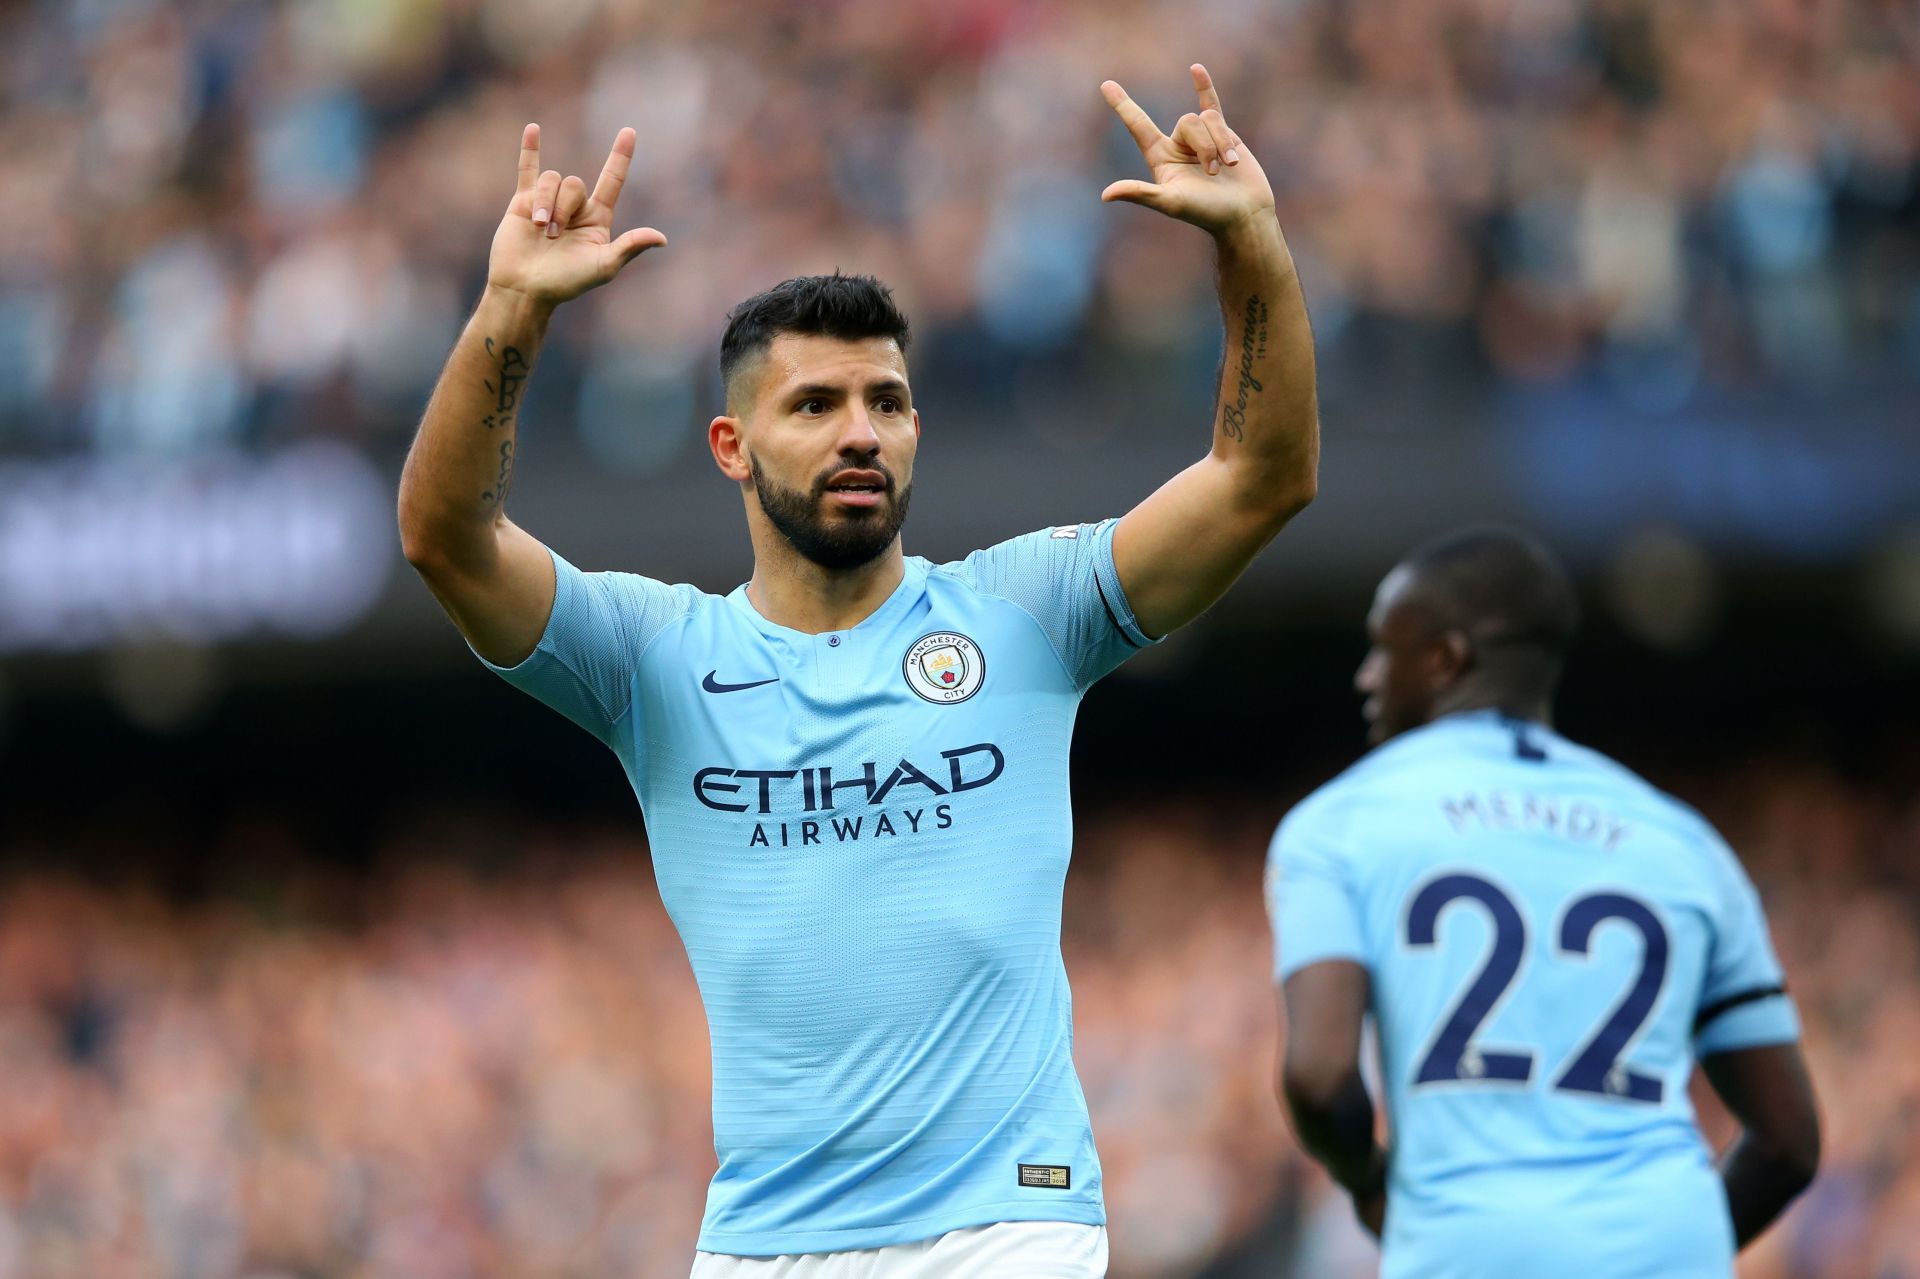 Sergio Aguero is a Manchester City legend and one of the greatest strikers of all-time.